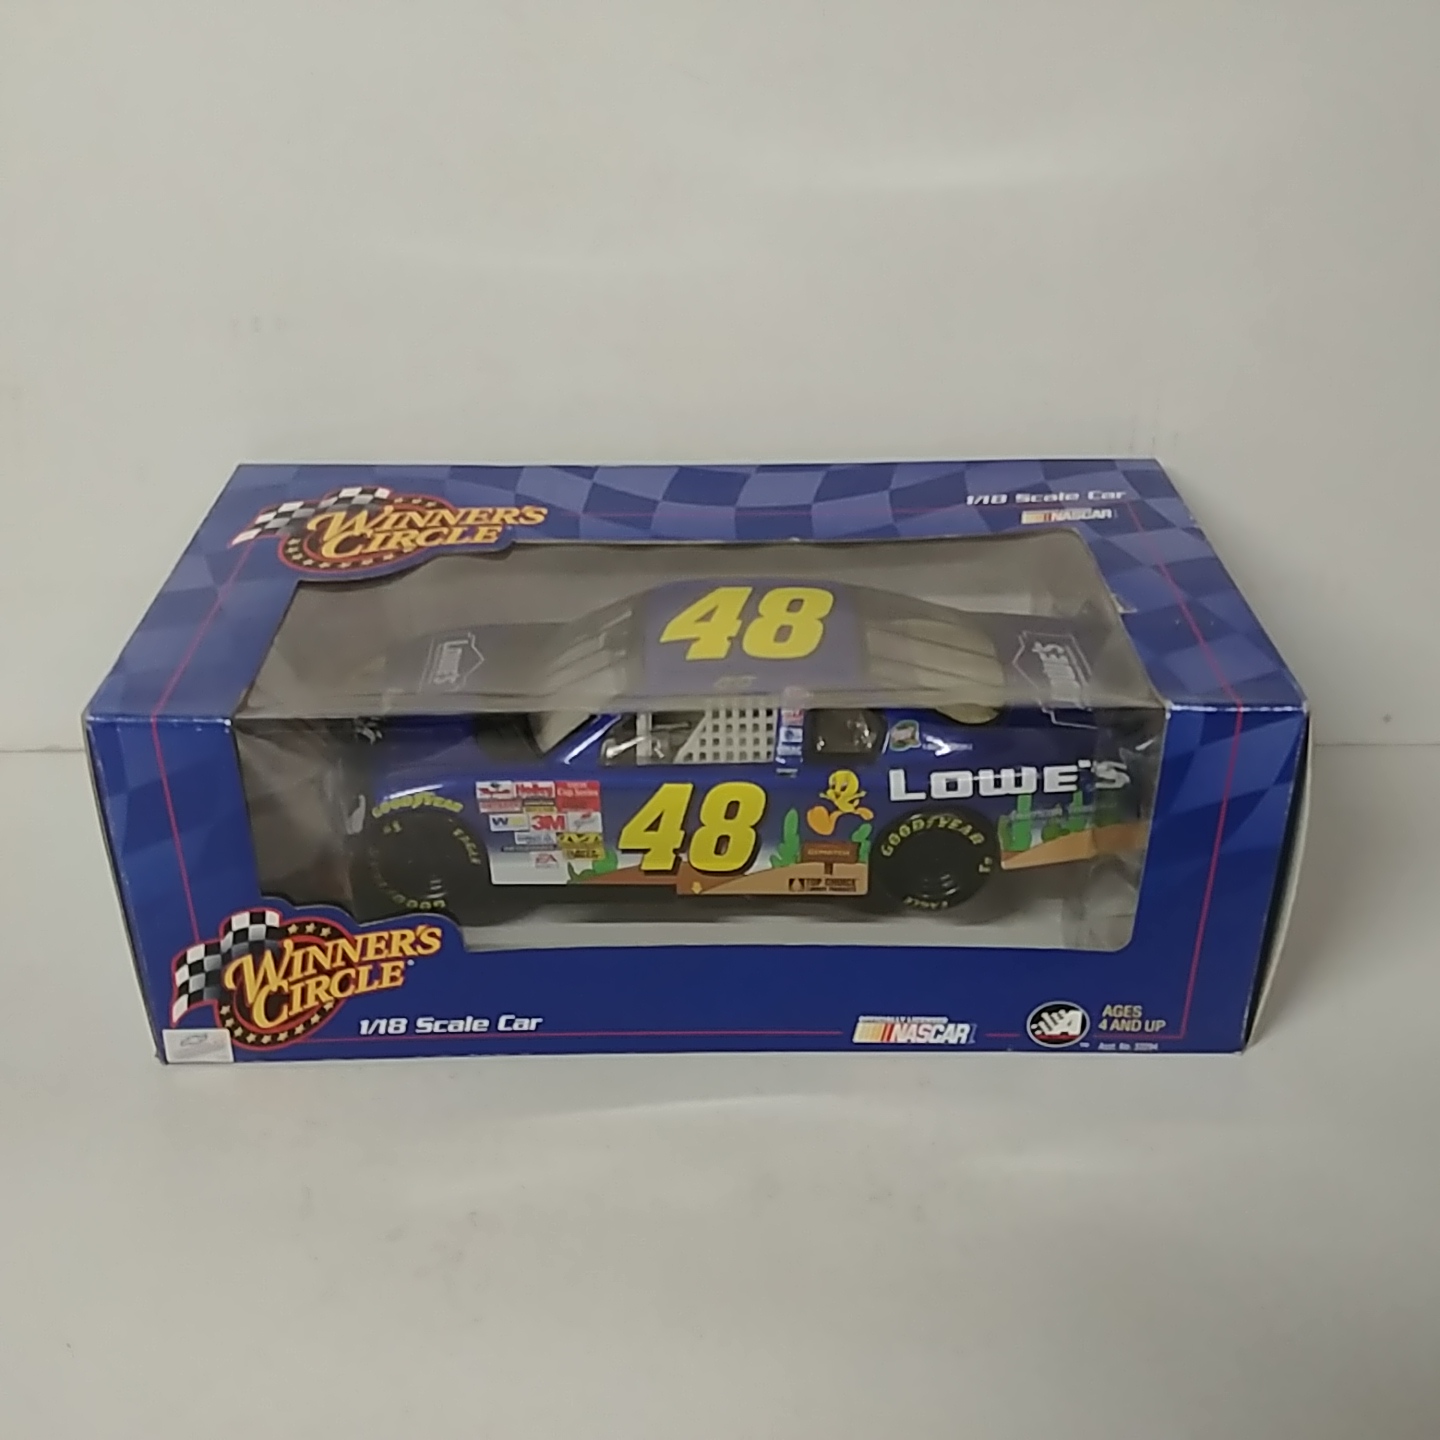 2002 Jimmie Johnson 1/18th Lowe's "Looney Tunes" car